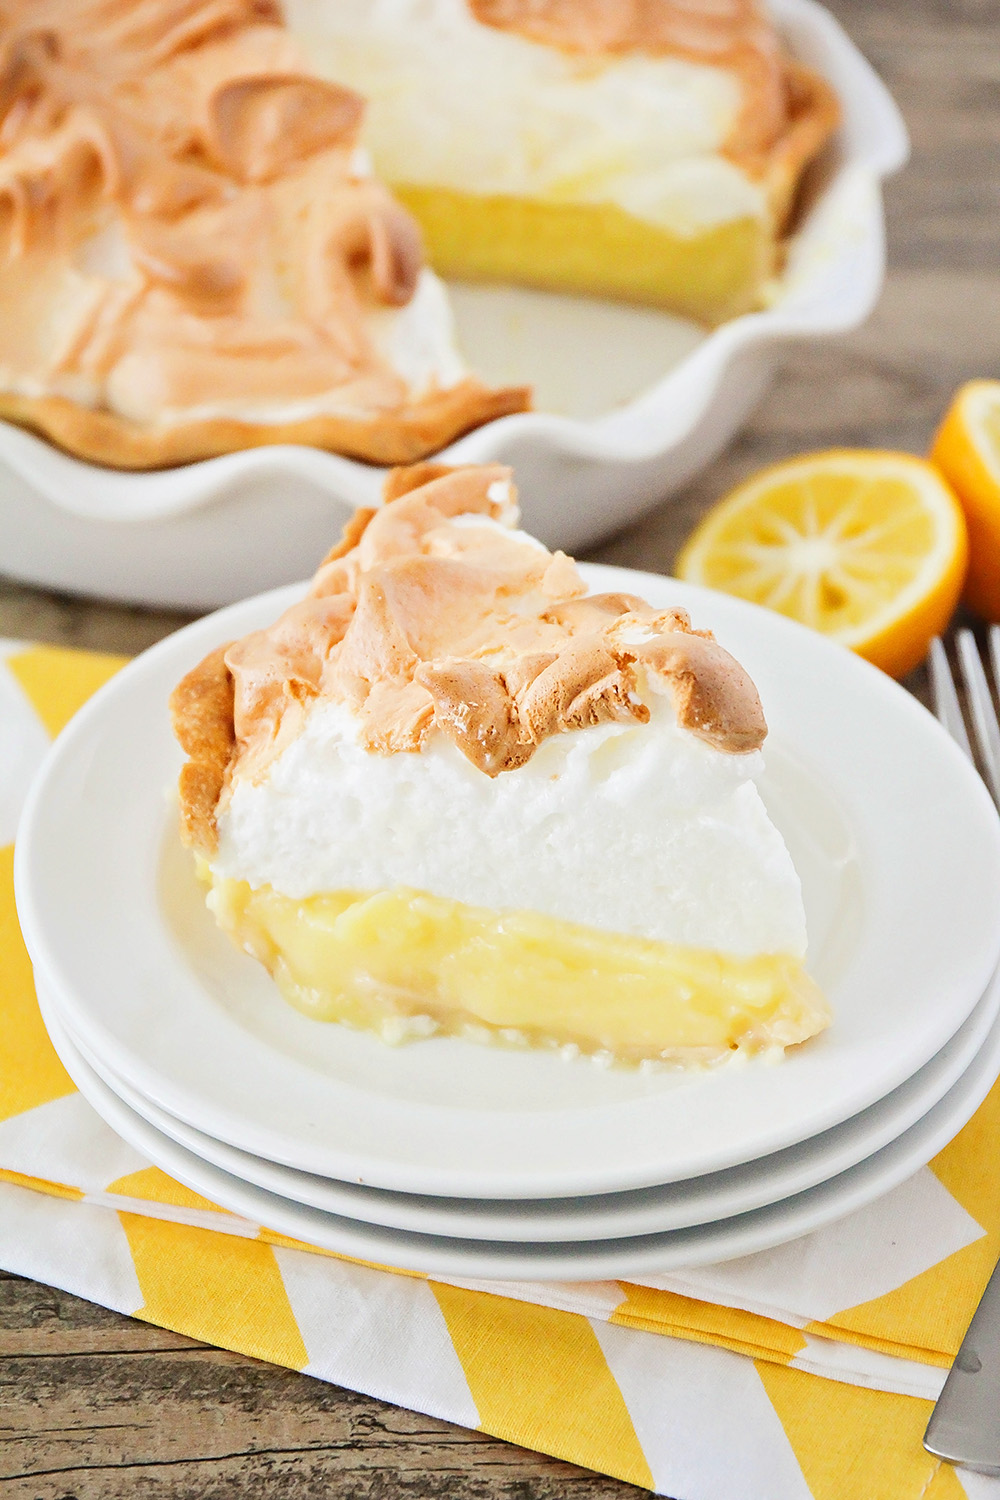 This lemon meringue pie is so heavenly and easy to make, with a deliciously tart lemon custard and topped with clouds of sweet meringue!